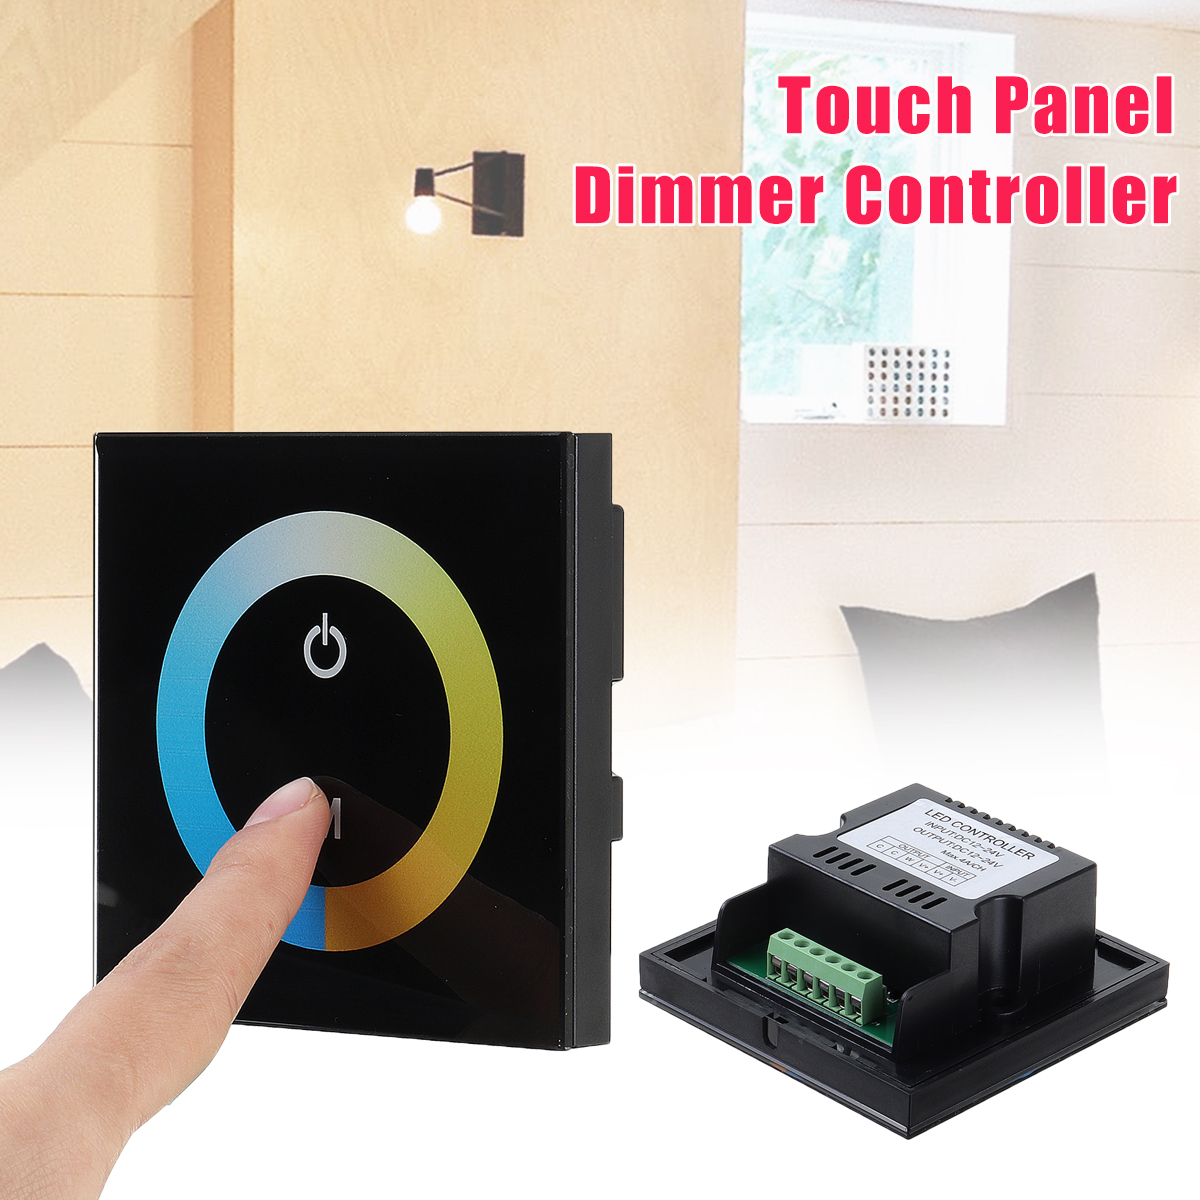 DC-12V-24V-LED-Light-Dimmer-Controller-Switch-Wall-Mounted-Sensitive-Touch-Panel-Dimmer-Switch-1610039-2